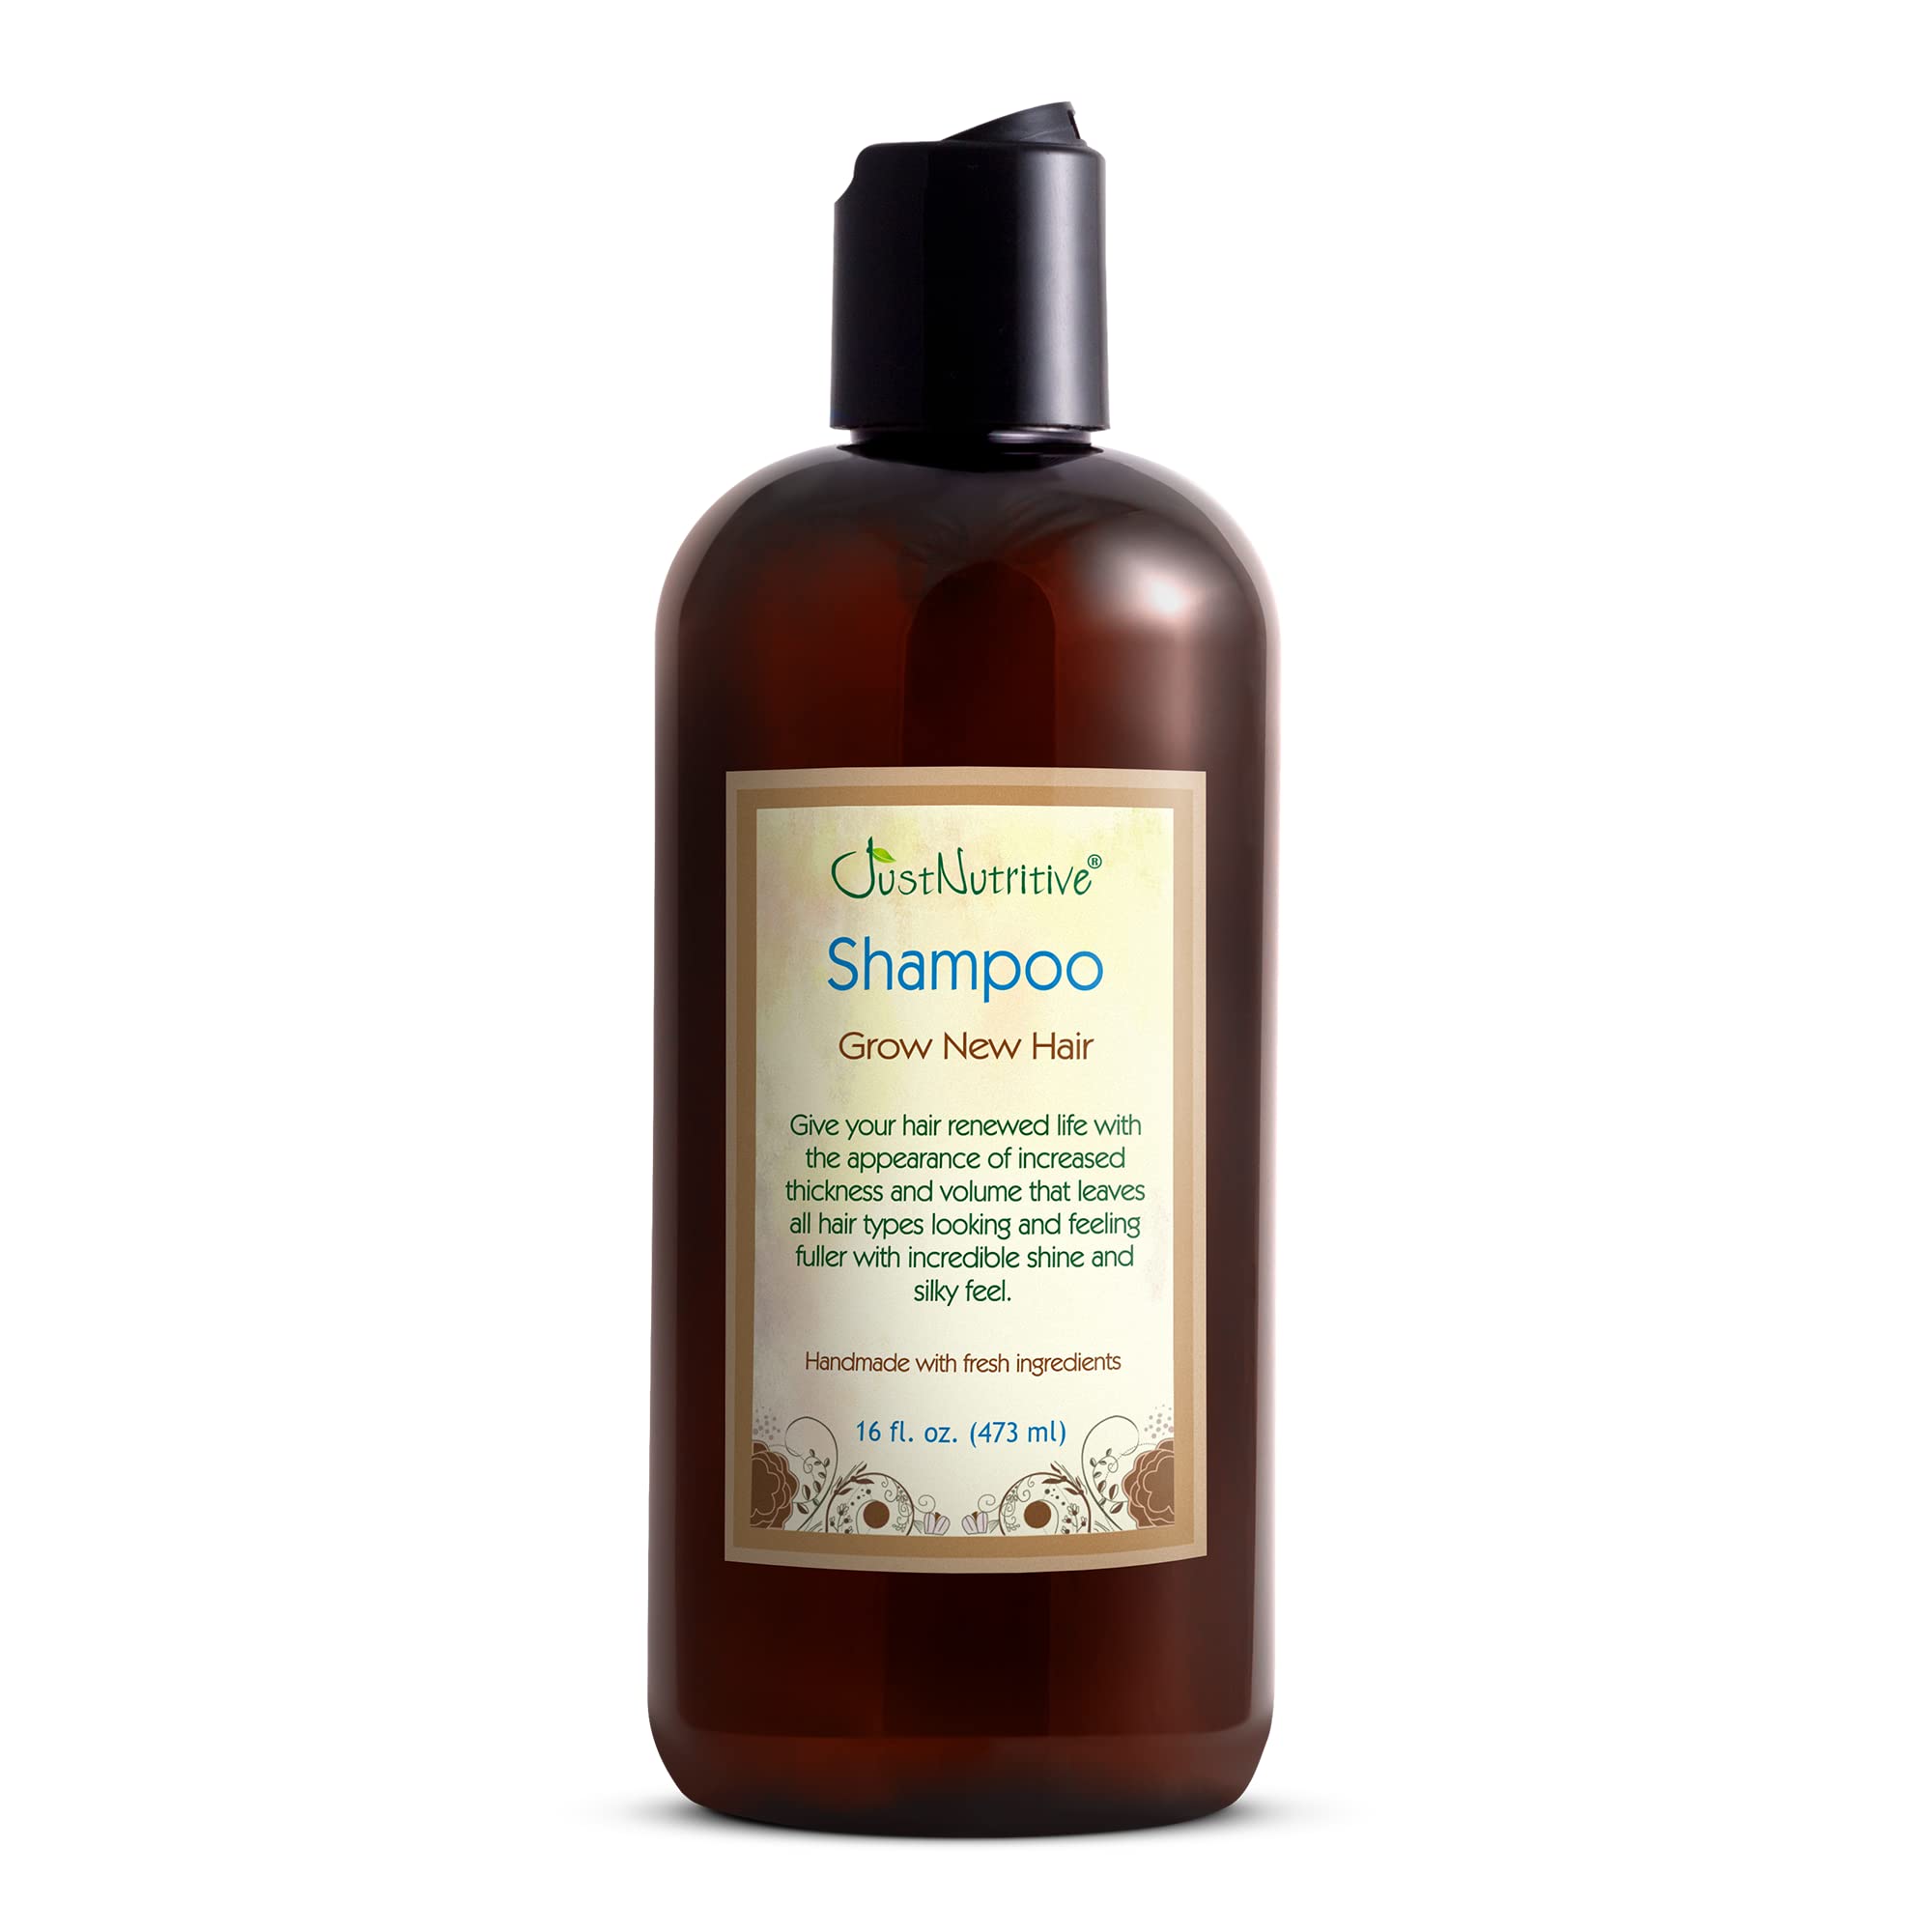 Best vegan shampoos and conditioners for oily, curly and coloured hair |  The Independent